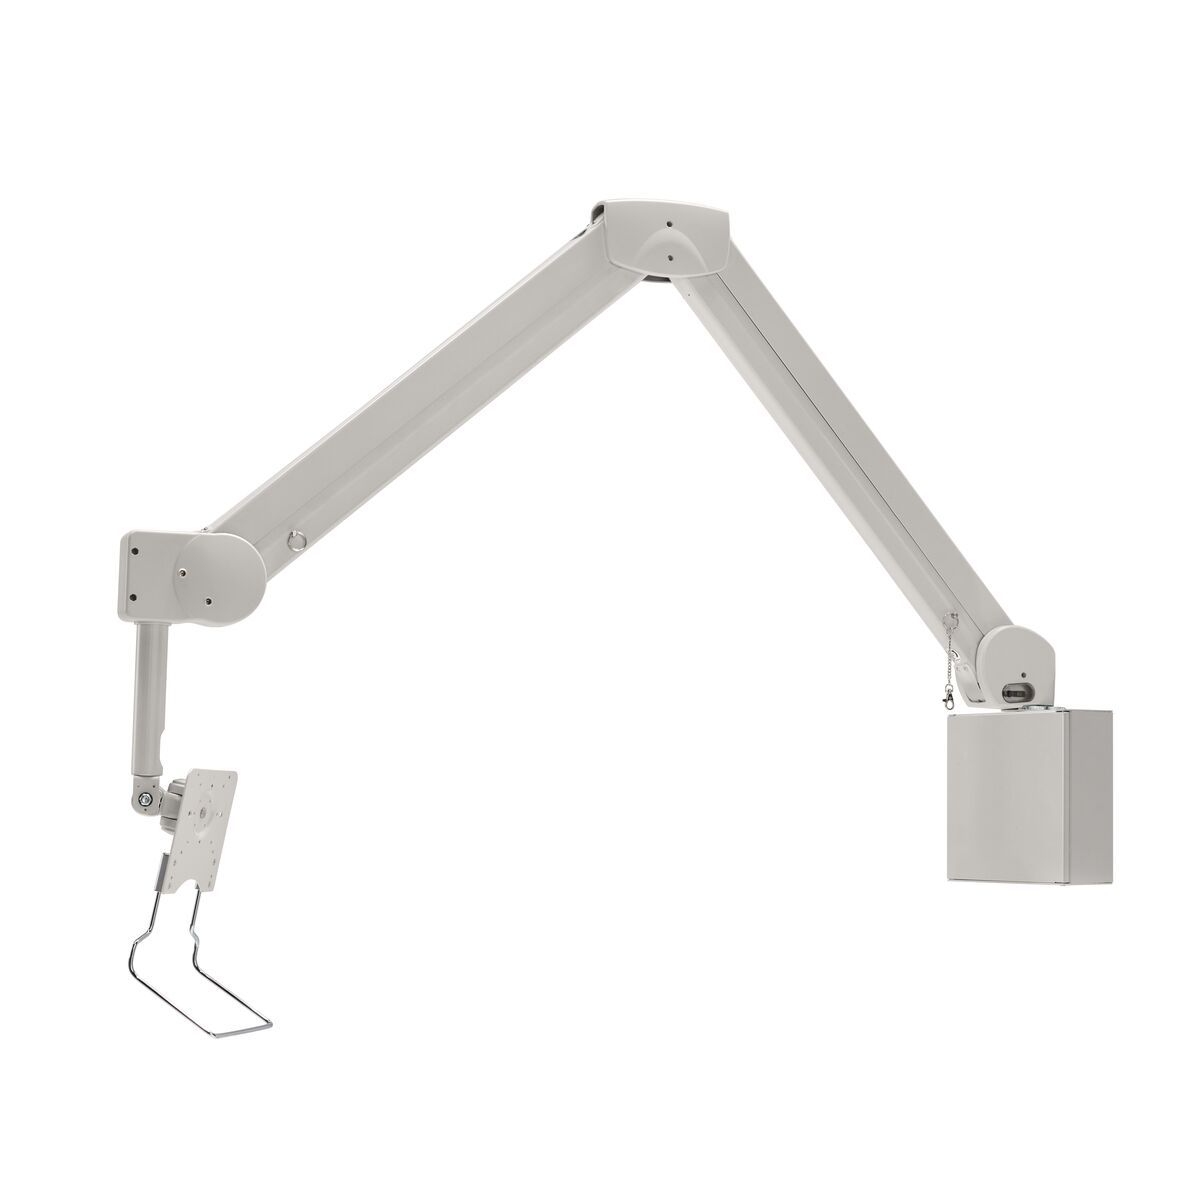 Vogel's PMW 7014 Medical wall mount - Product